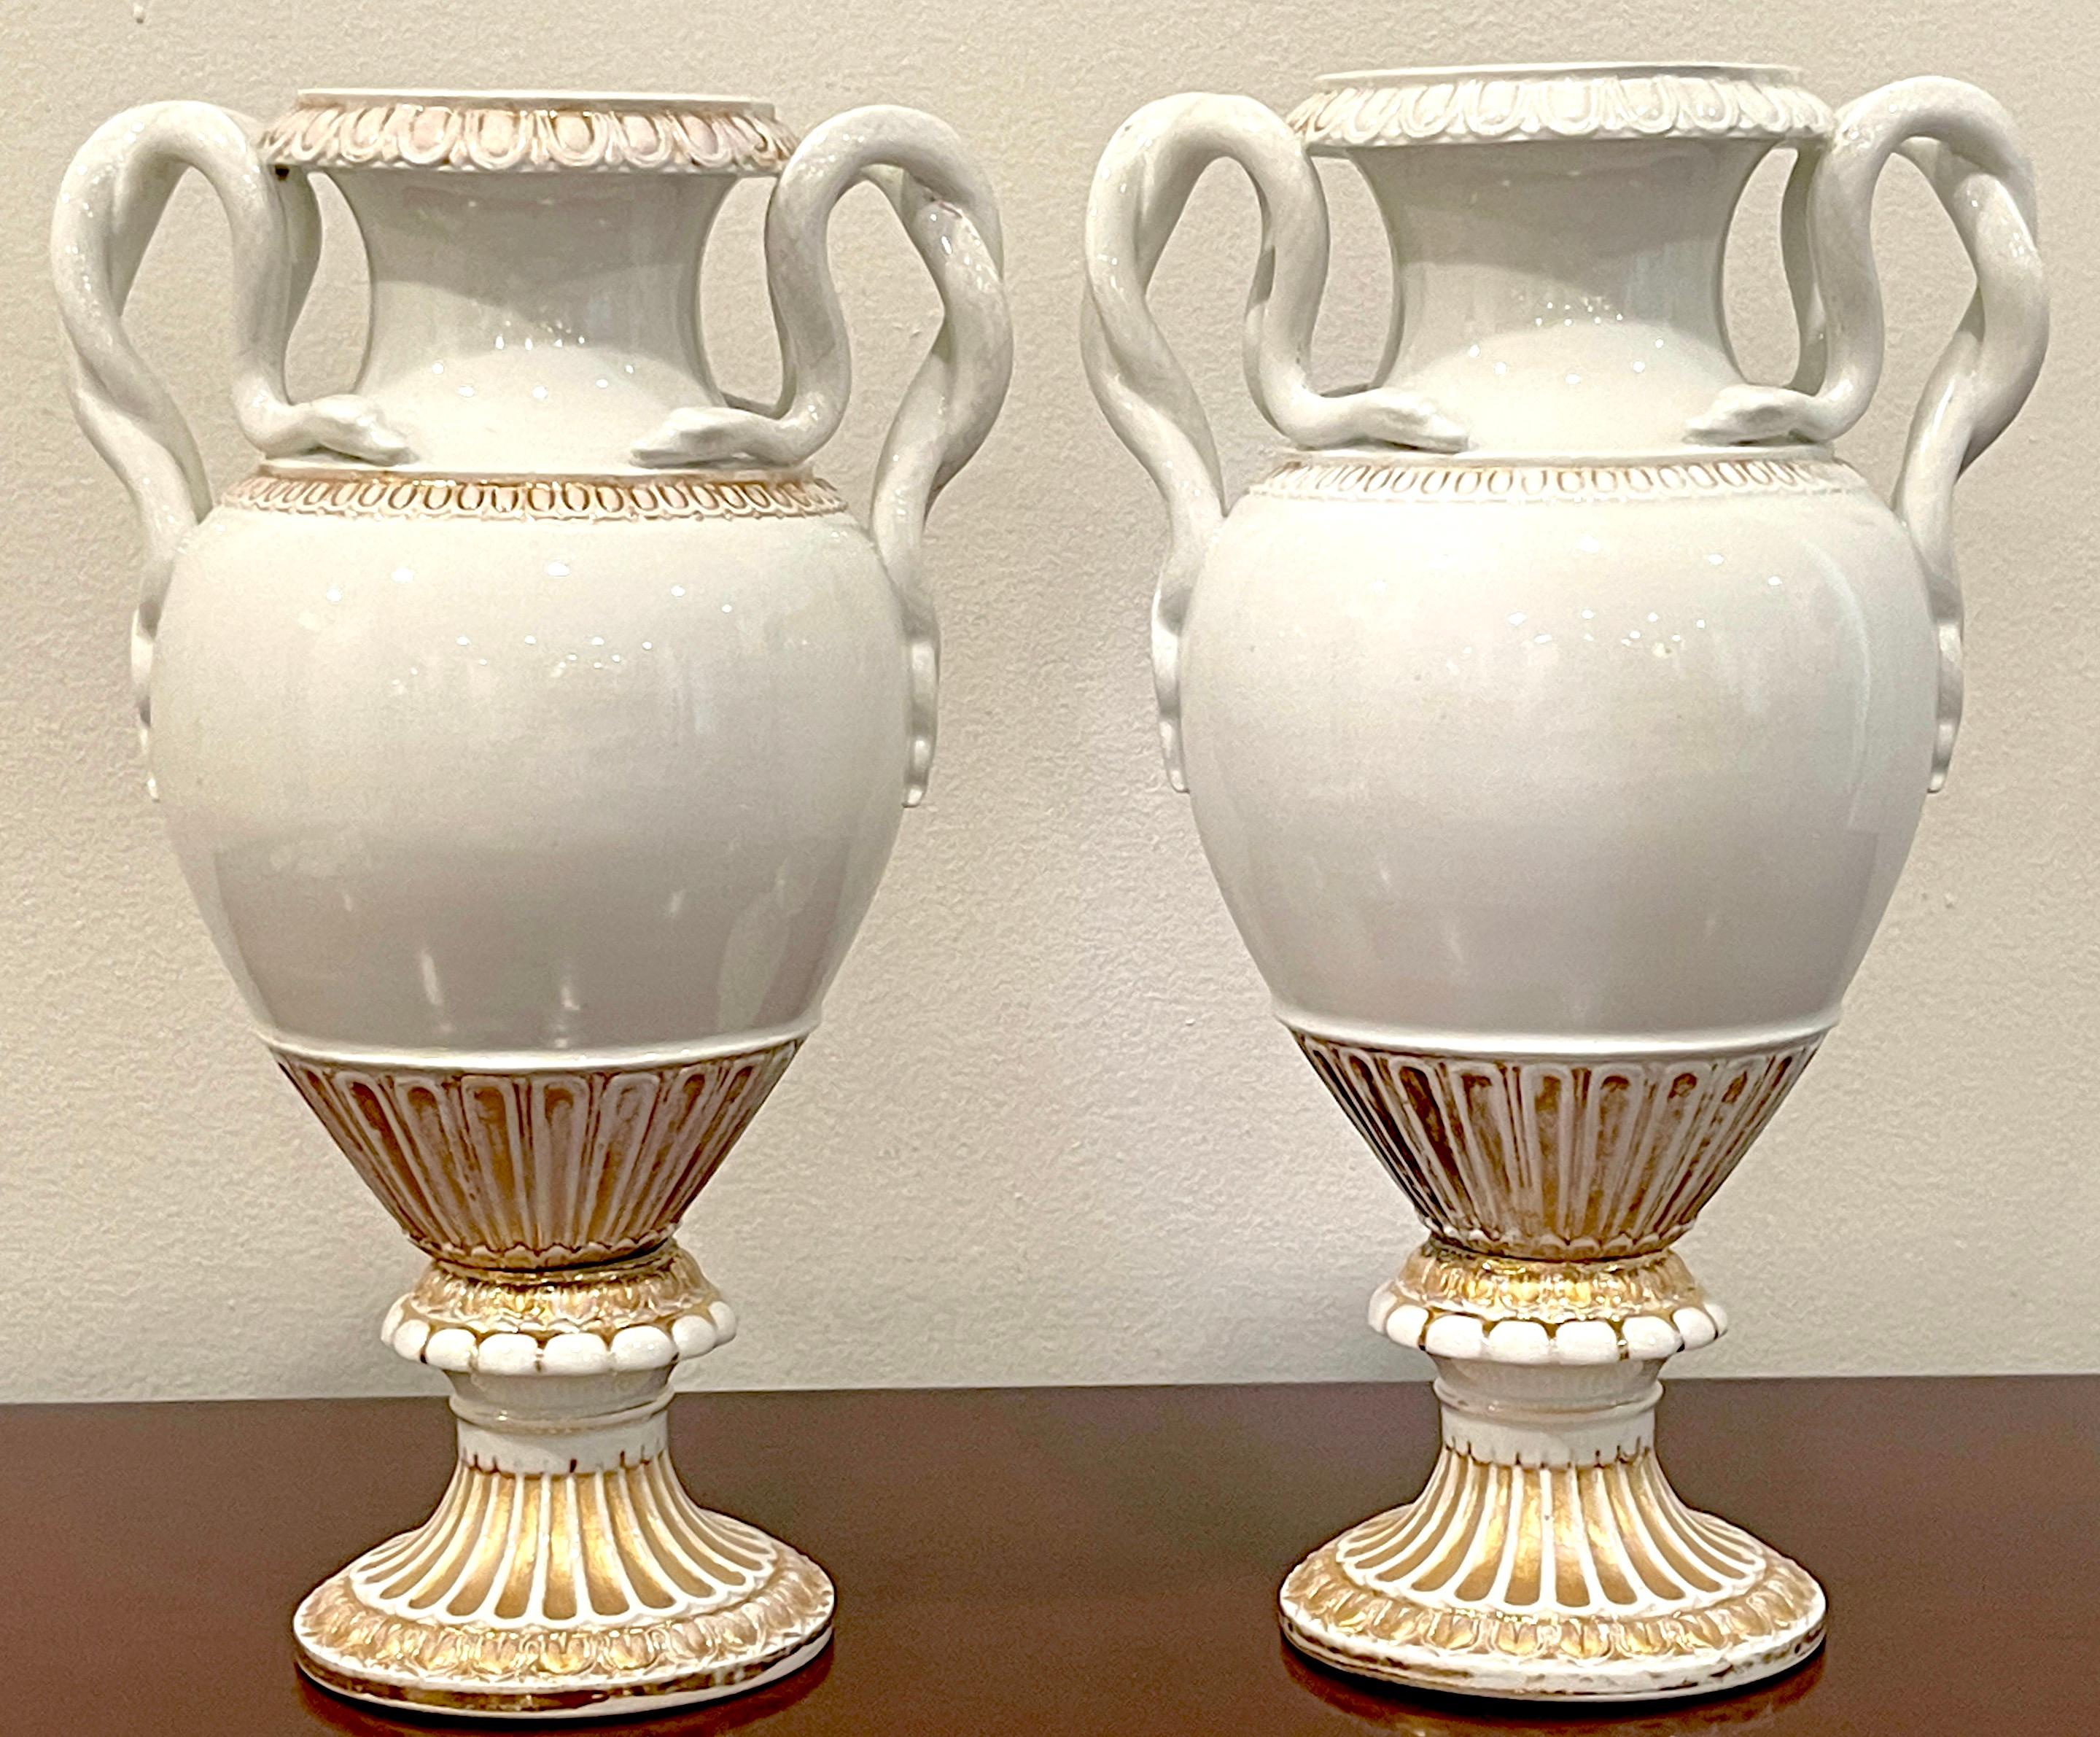 Pair of 19th Century Meissen Gold & White Neoclassical Serpent Handled Vases In Good Condition For Sale In West Palm Beach, FL